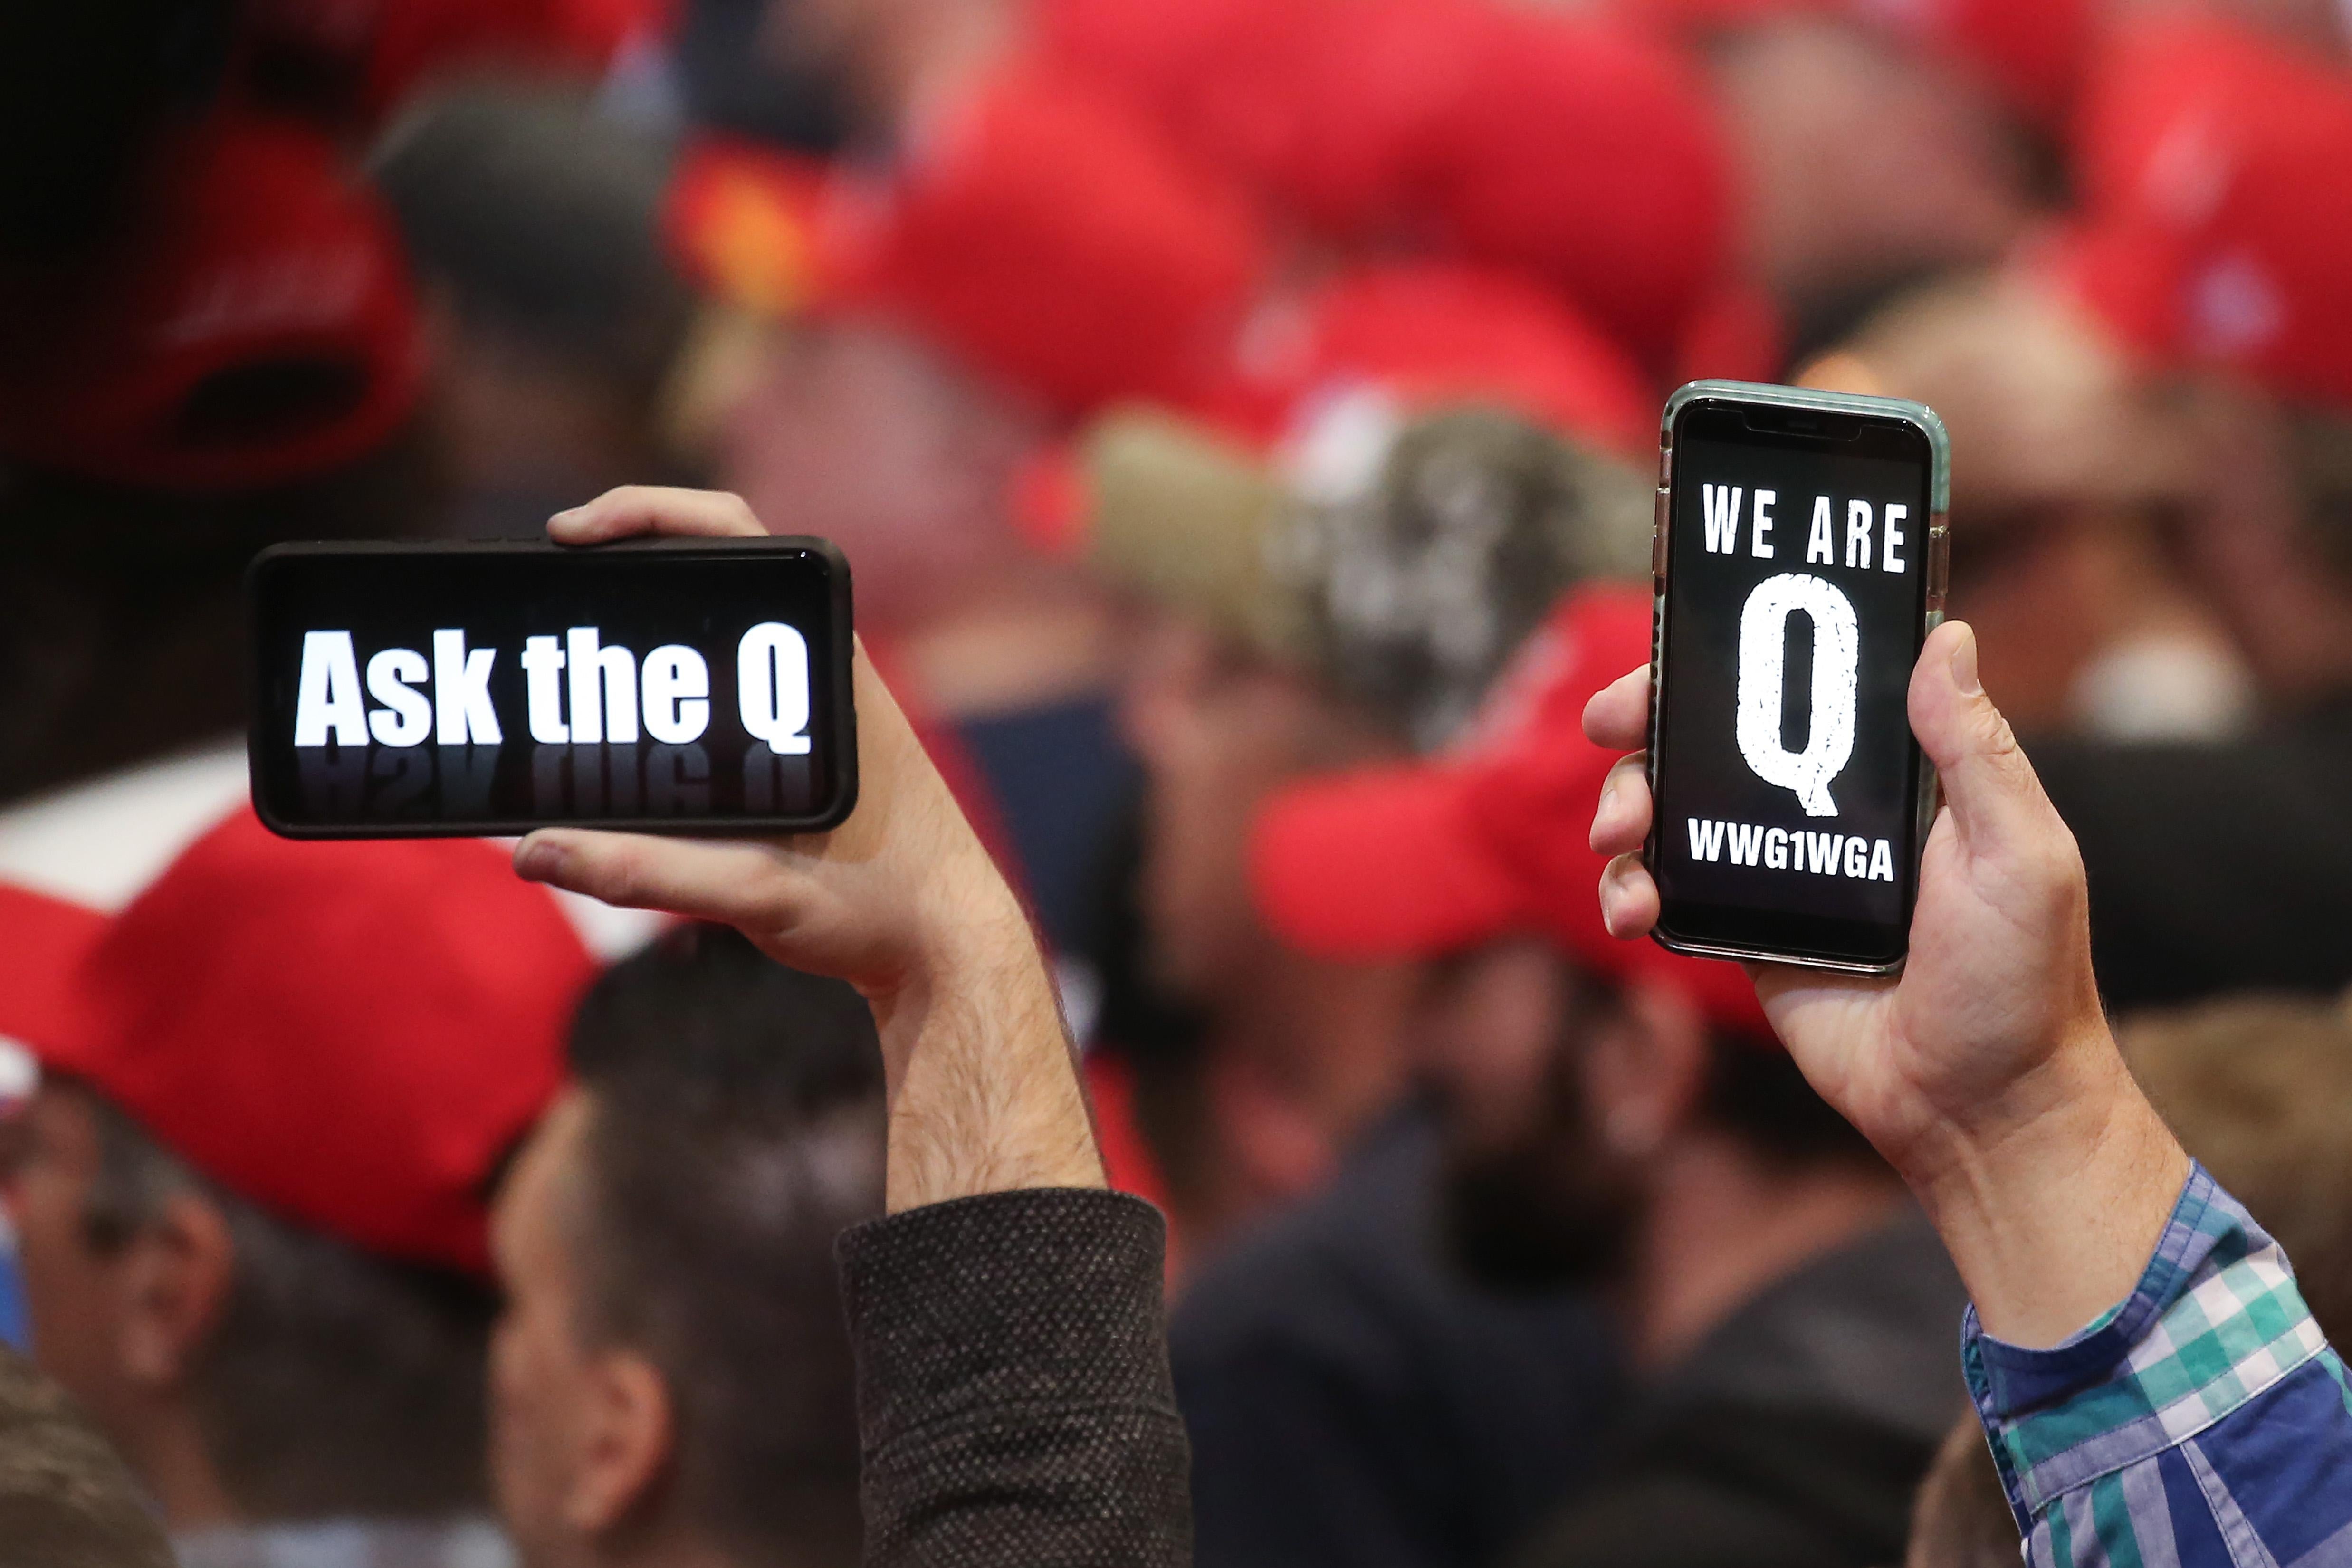 Trump supporters hold up phones displaying QAnon slogans, a sea of red MAGA hats in the background